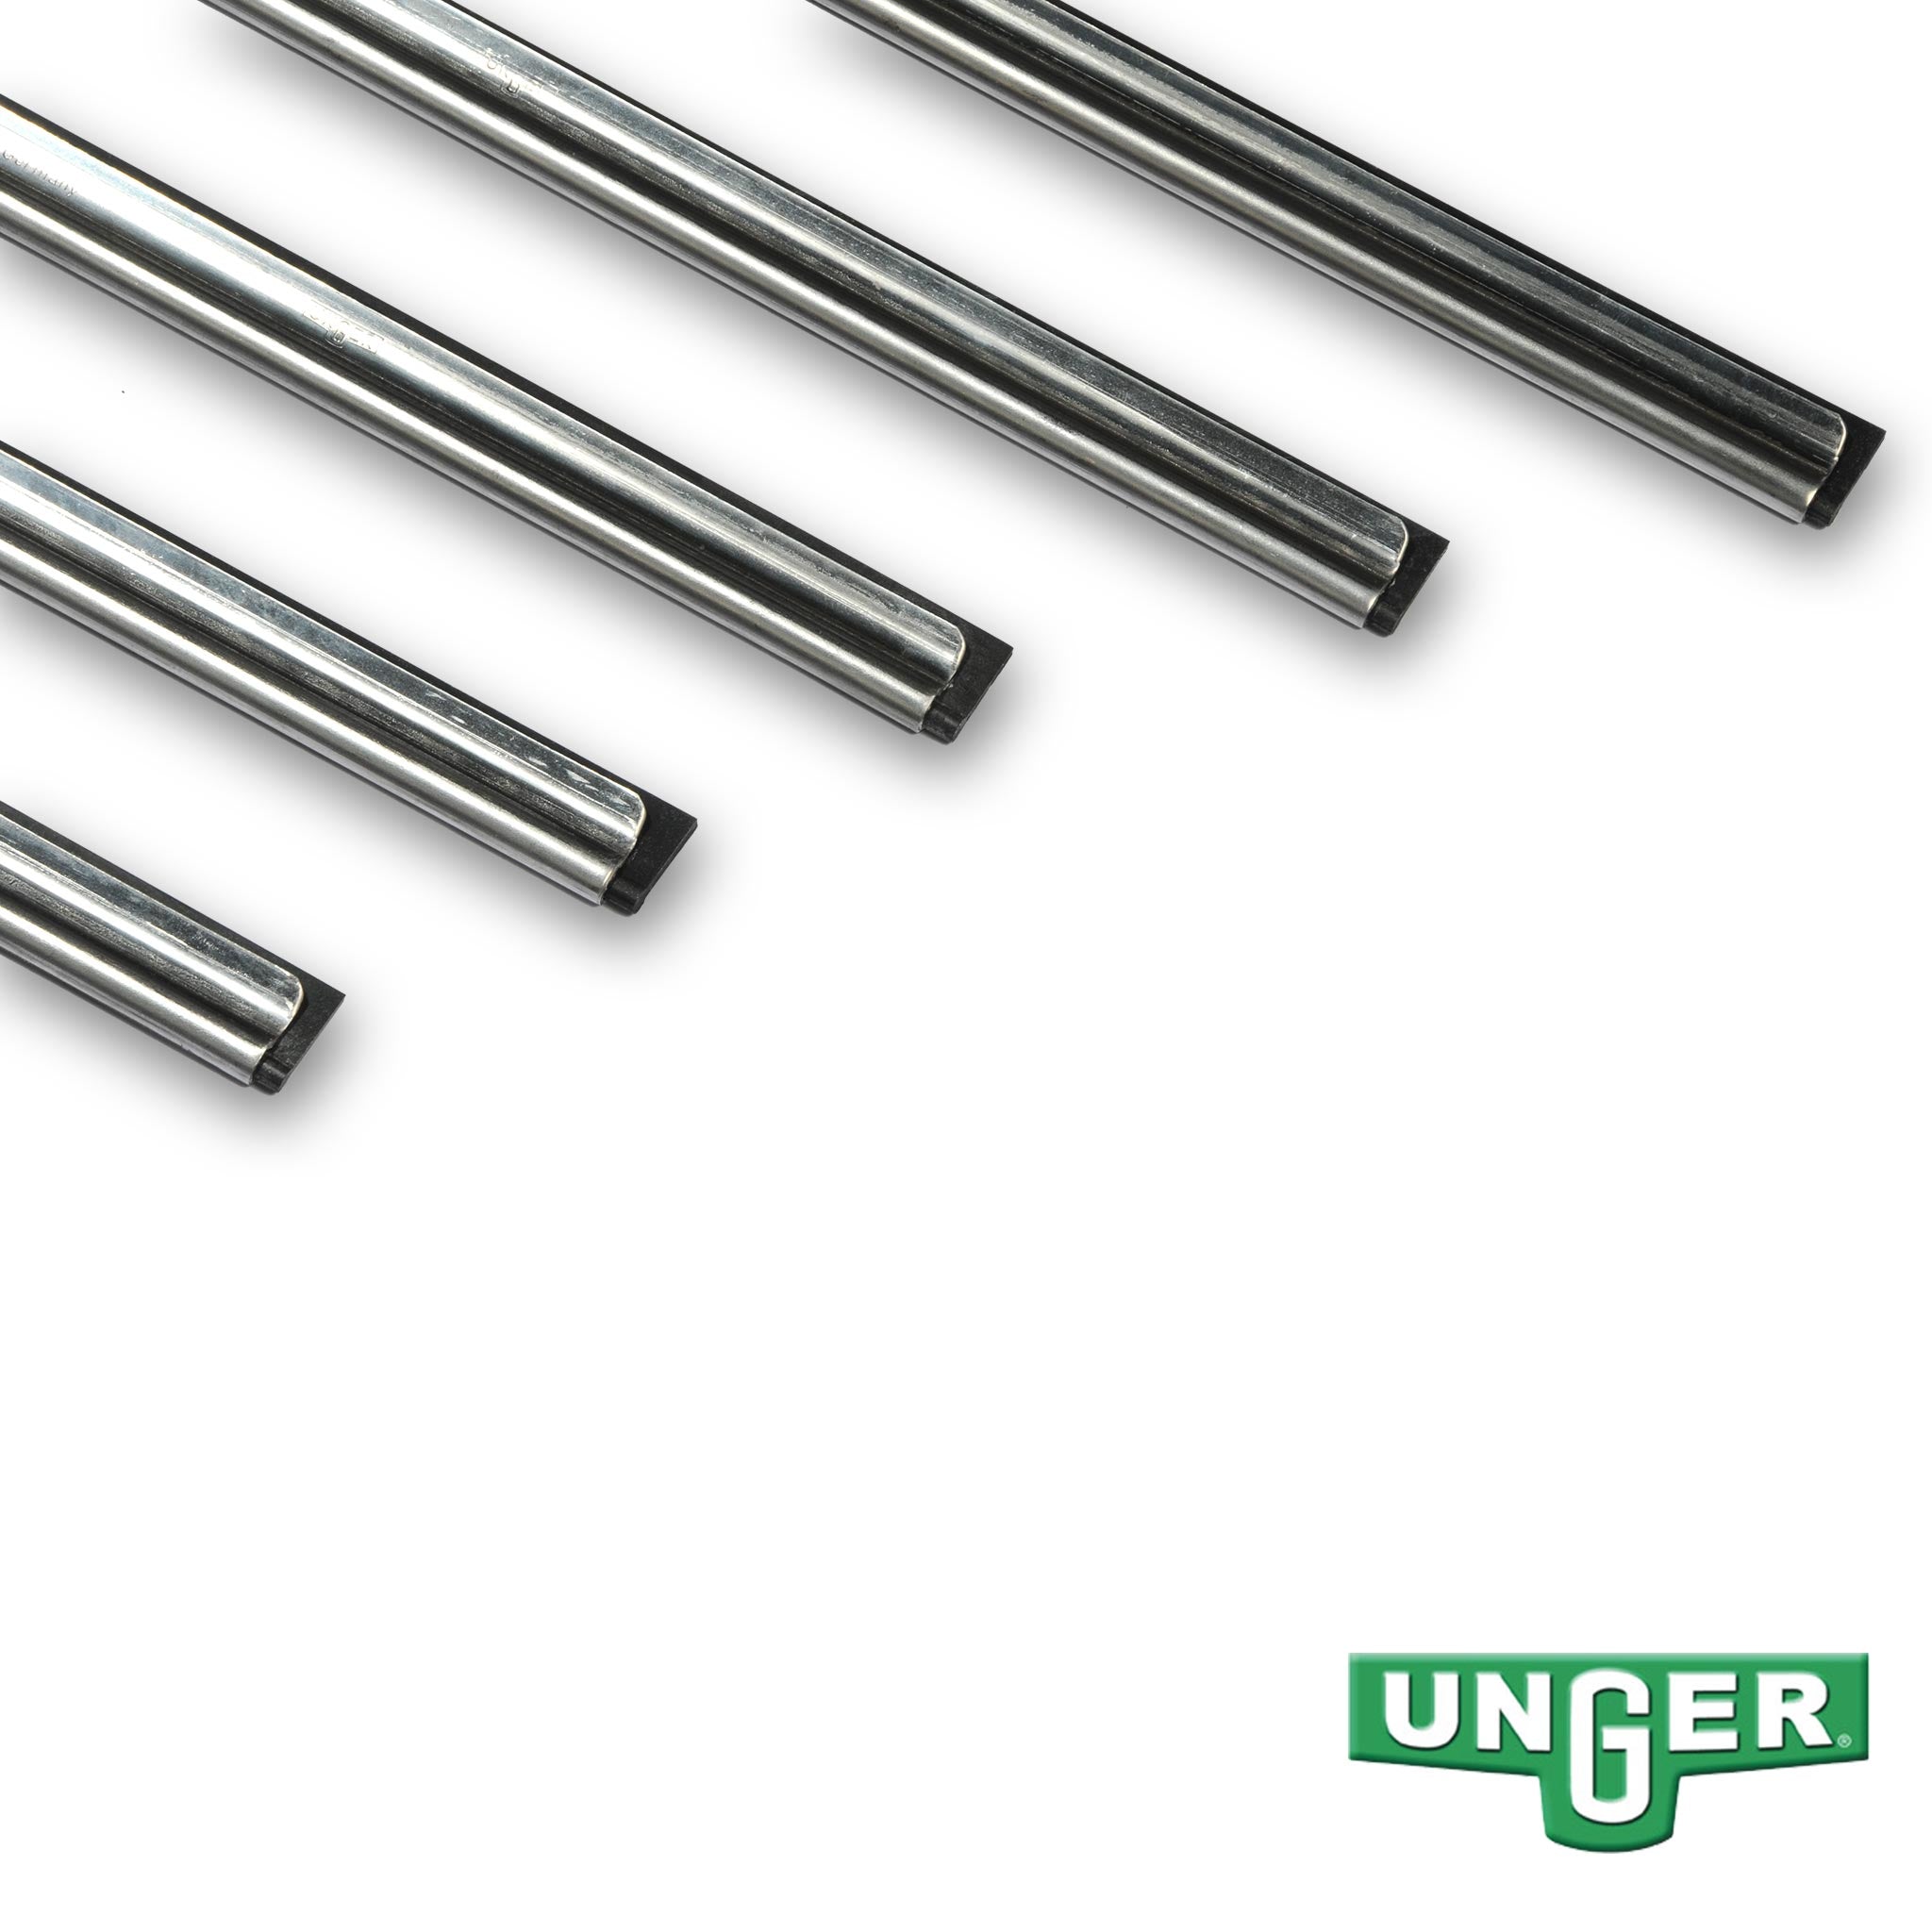 Unger Pro Squeegee - Stainless Steel